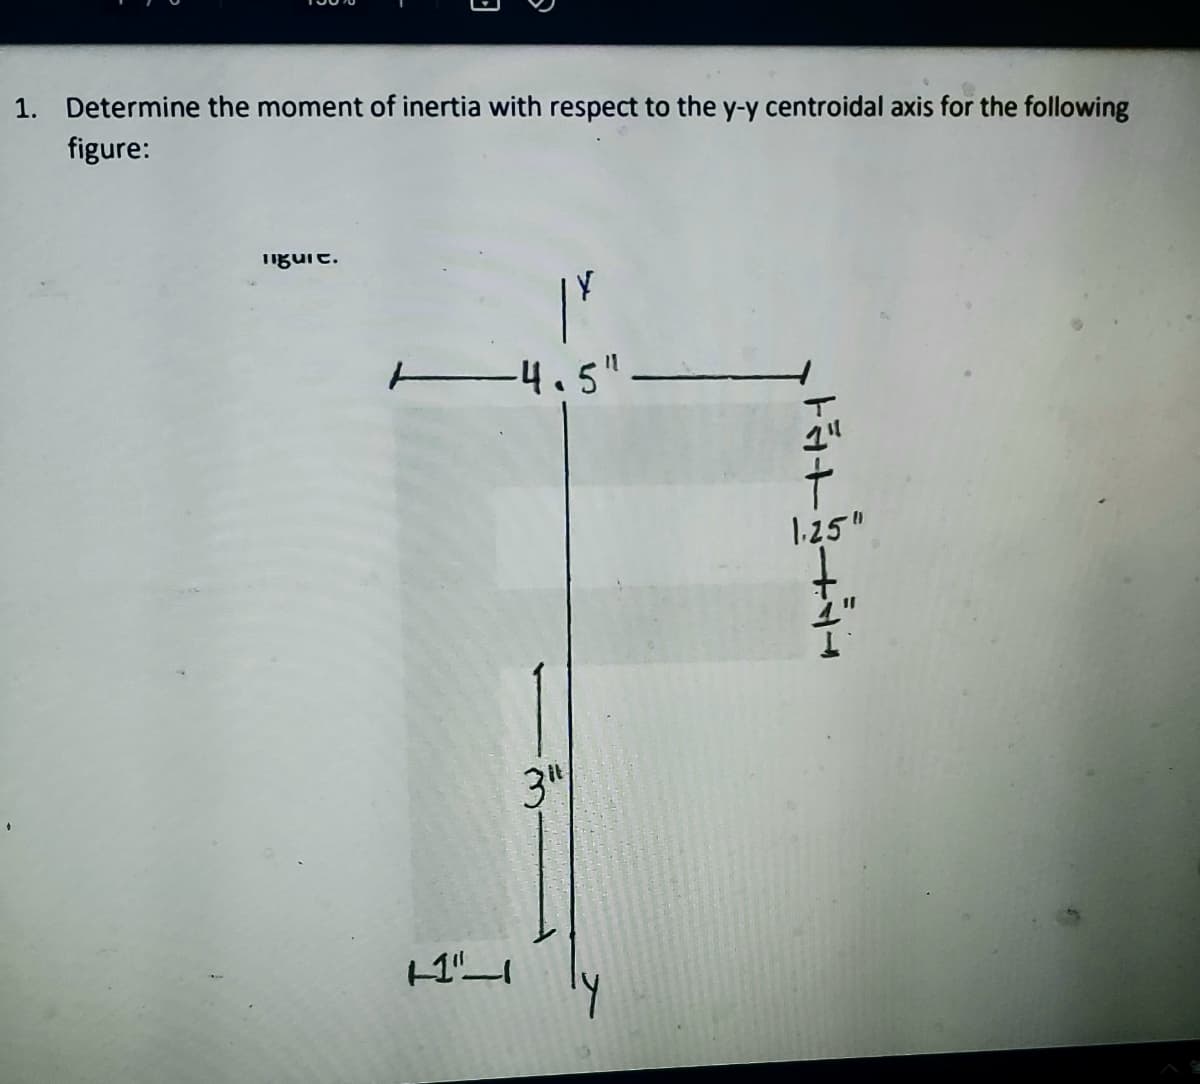 1. Determine the moment of inertia with respect to the y-y centroidal axis for the following
figure:
iguit.
-4.5"
1.25"
3"
